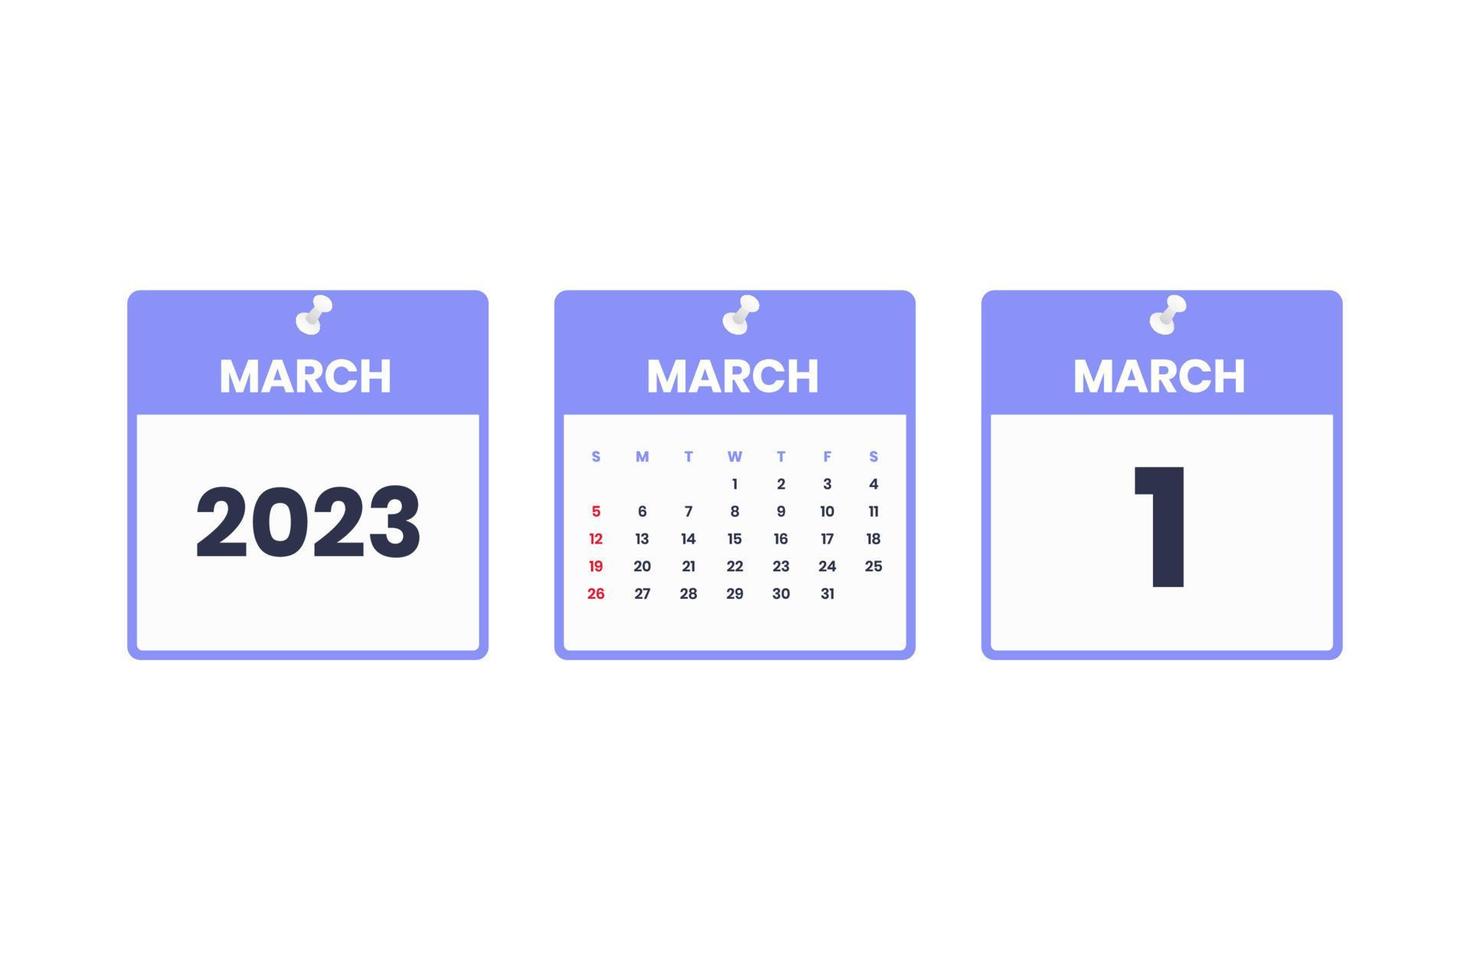 March calendar design. March 1 2023 calendar icon for schedule, appointment, important date concept vector